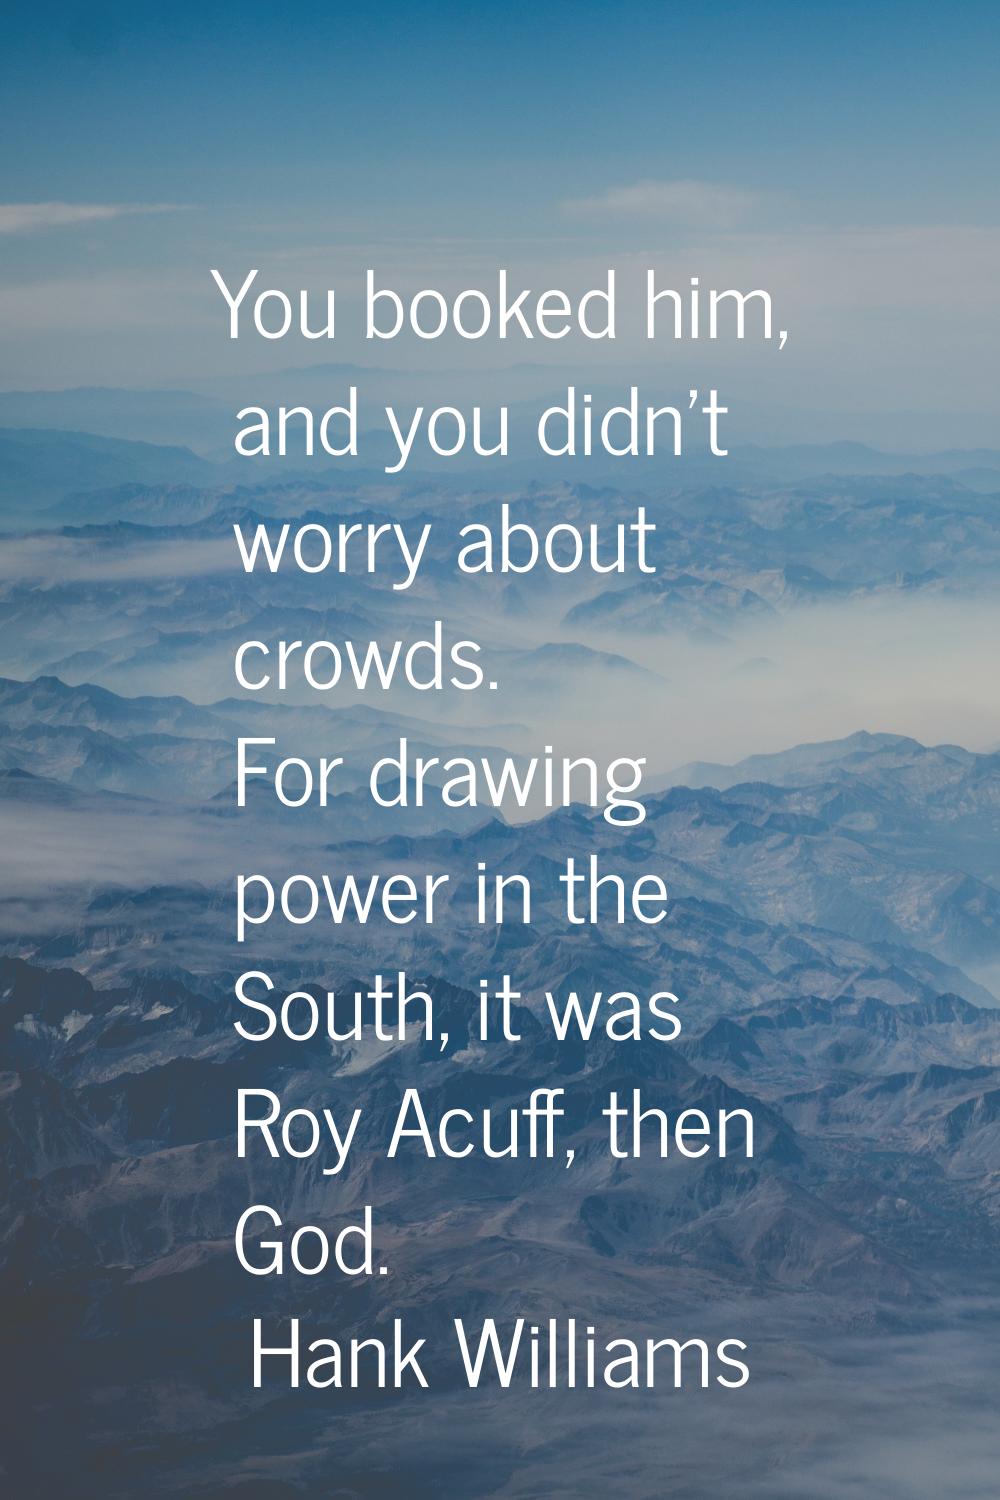 You booked him, and you didn't worry about crowds. For drawing power in the South, it was Roy Acuff